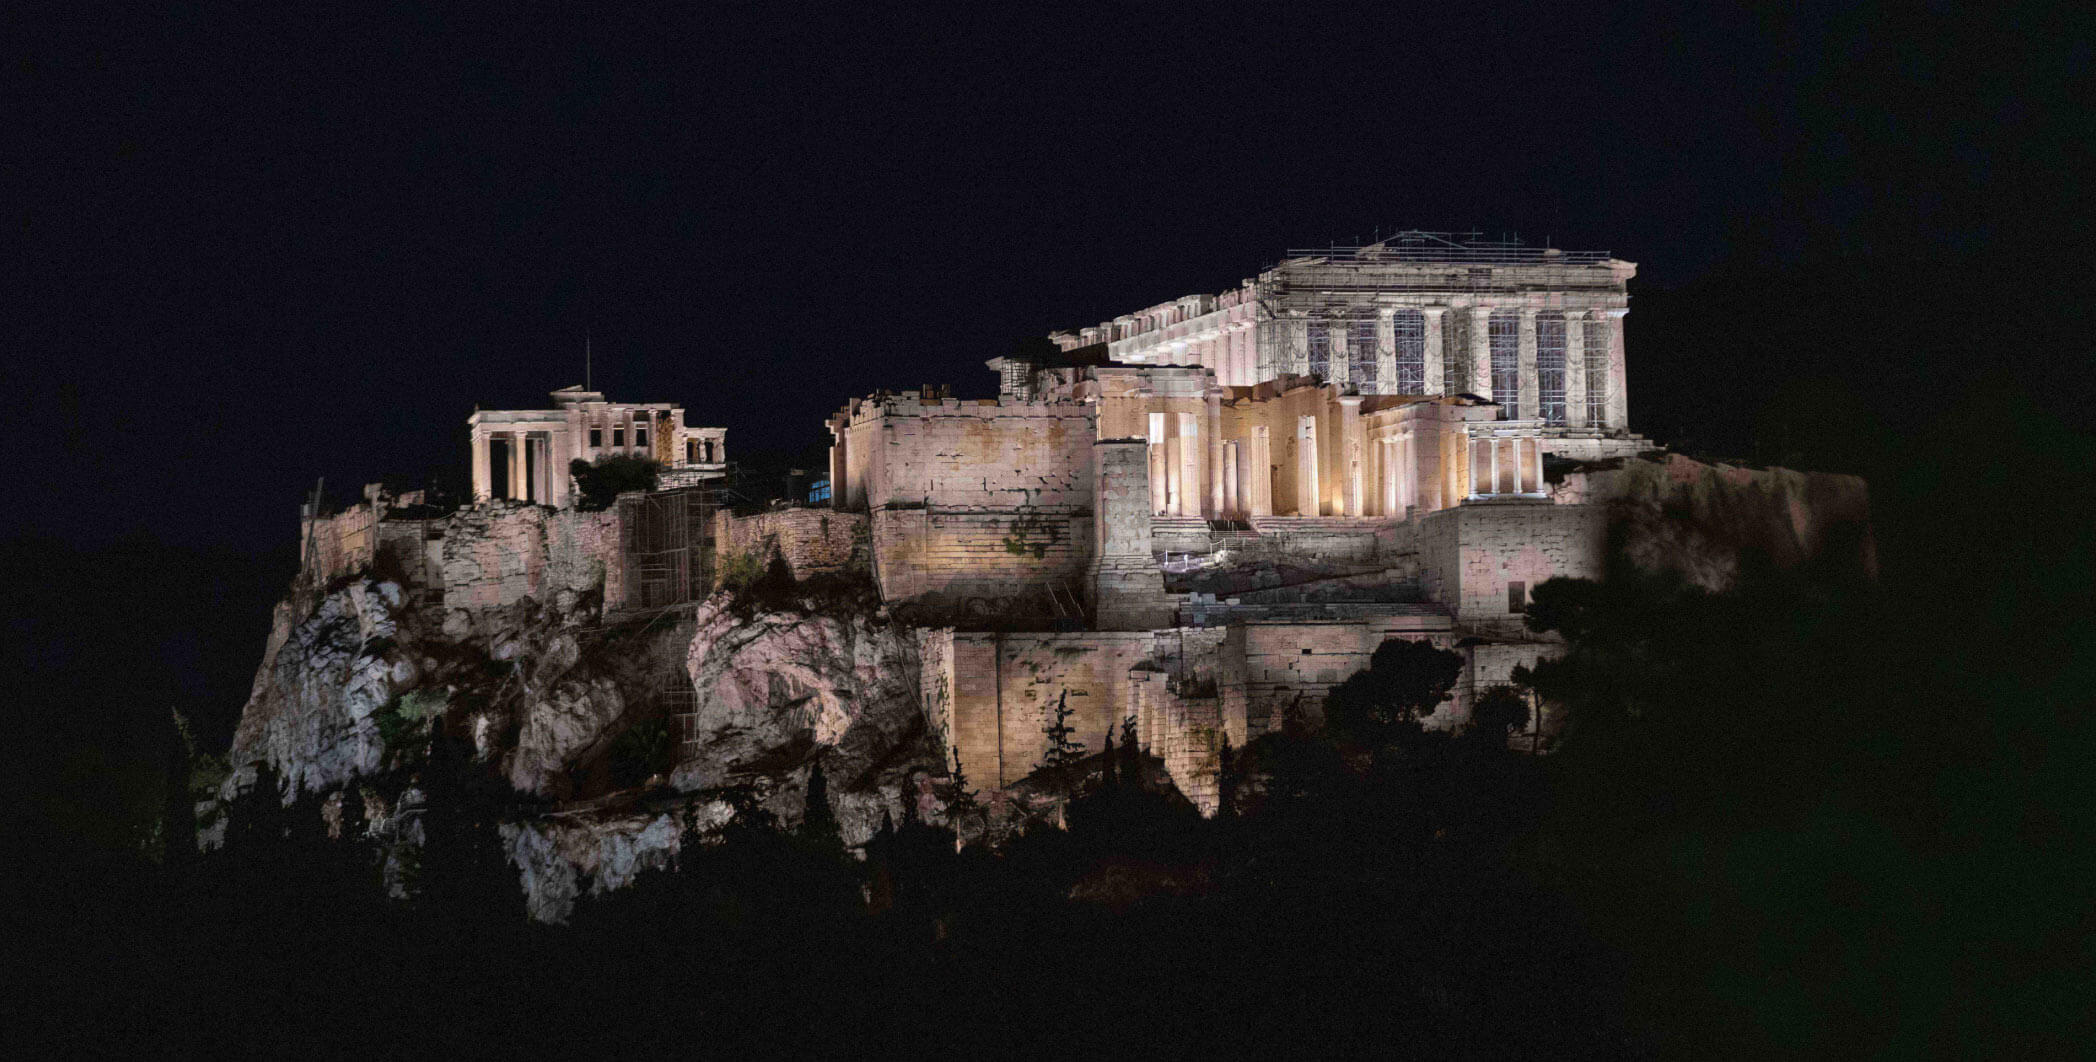 YARD-presentation_of_the_%ce%bdew_lighting_of_the_acropolis_of_athens_1